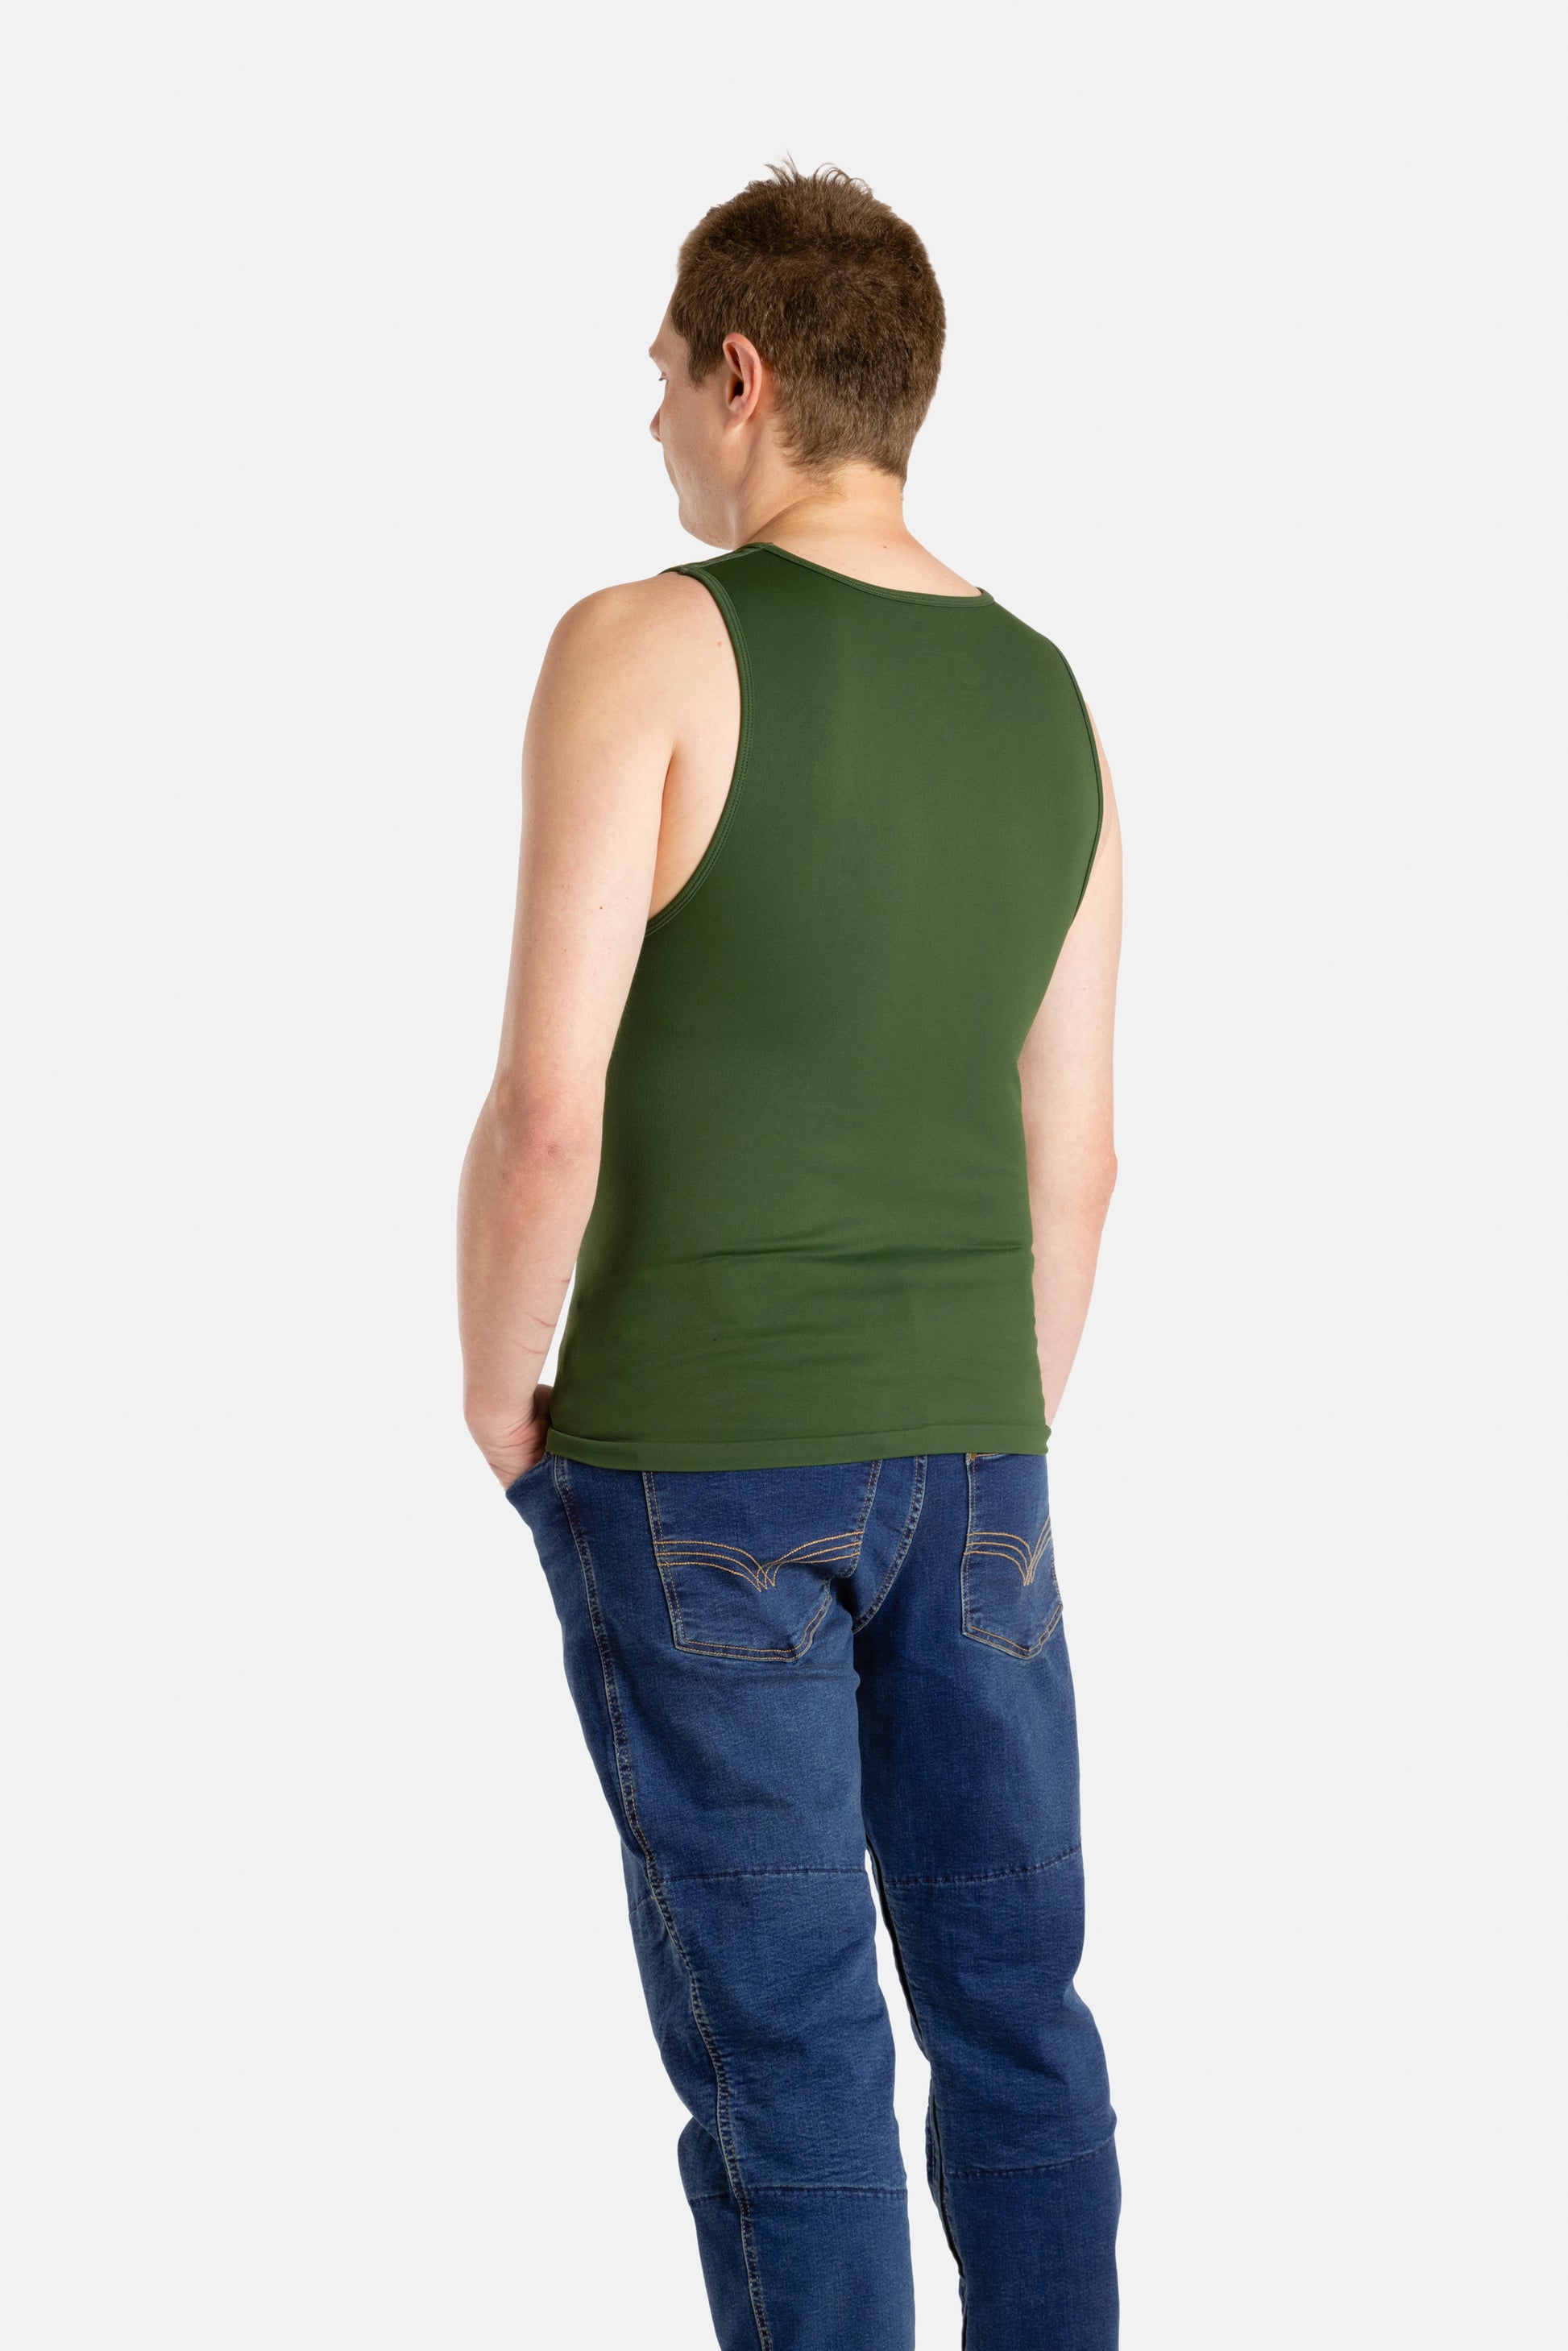 The back of a white man with short brown hair wearing an olive-green tank top and denim jeans.